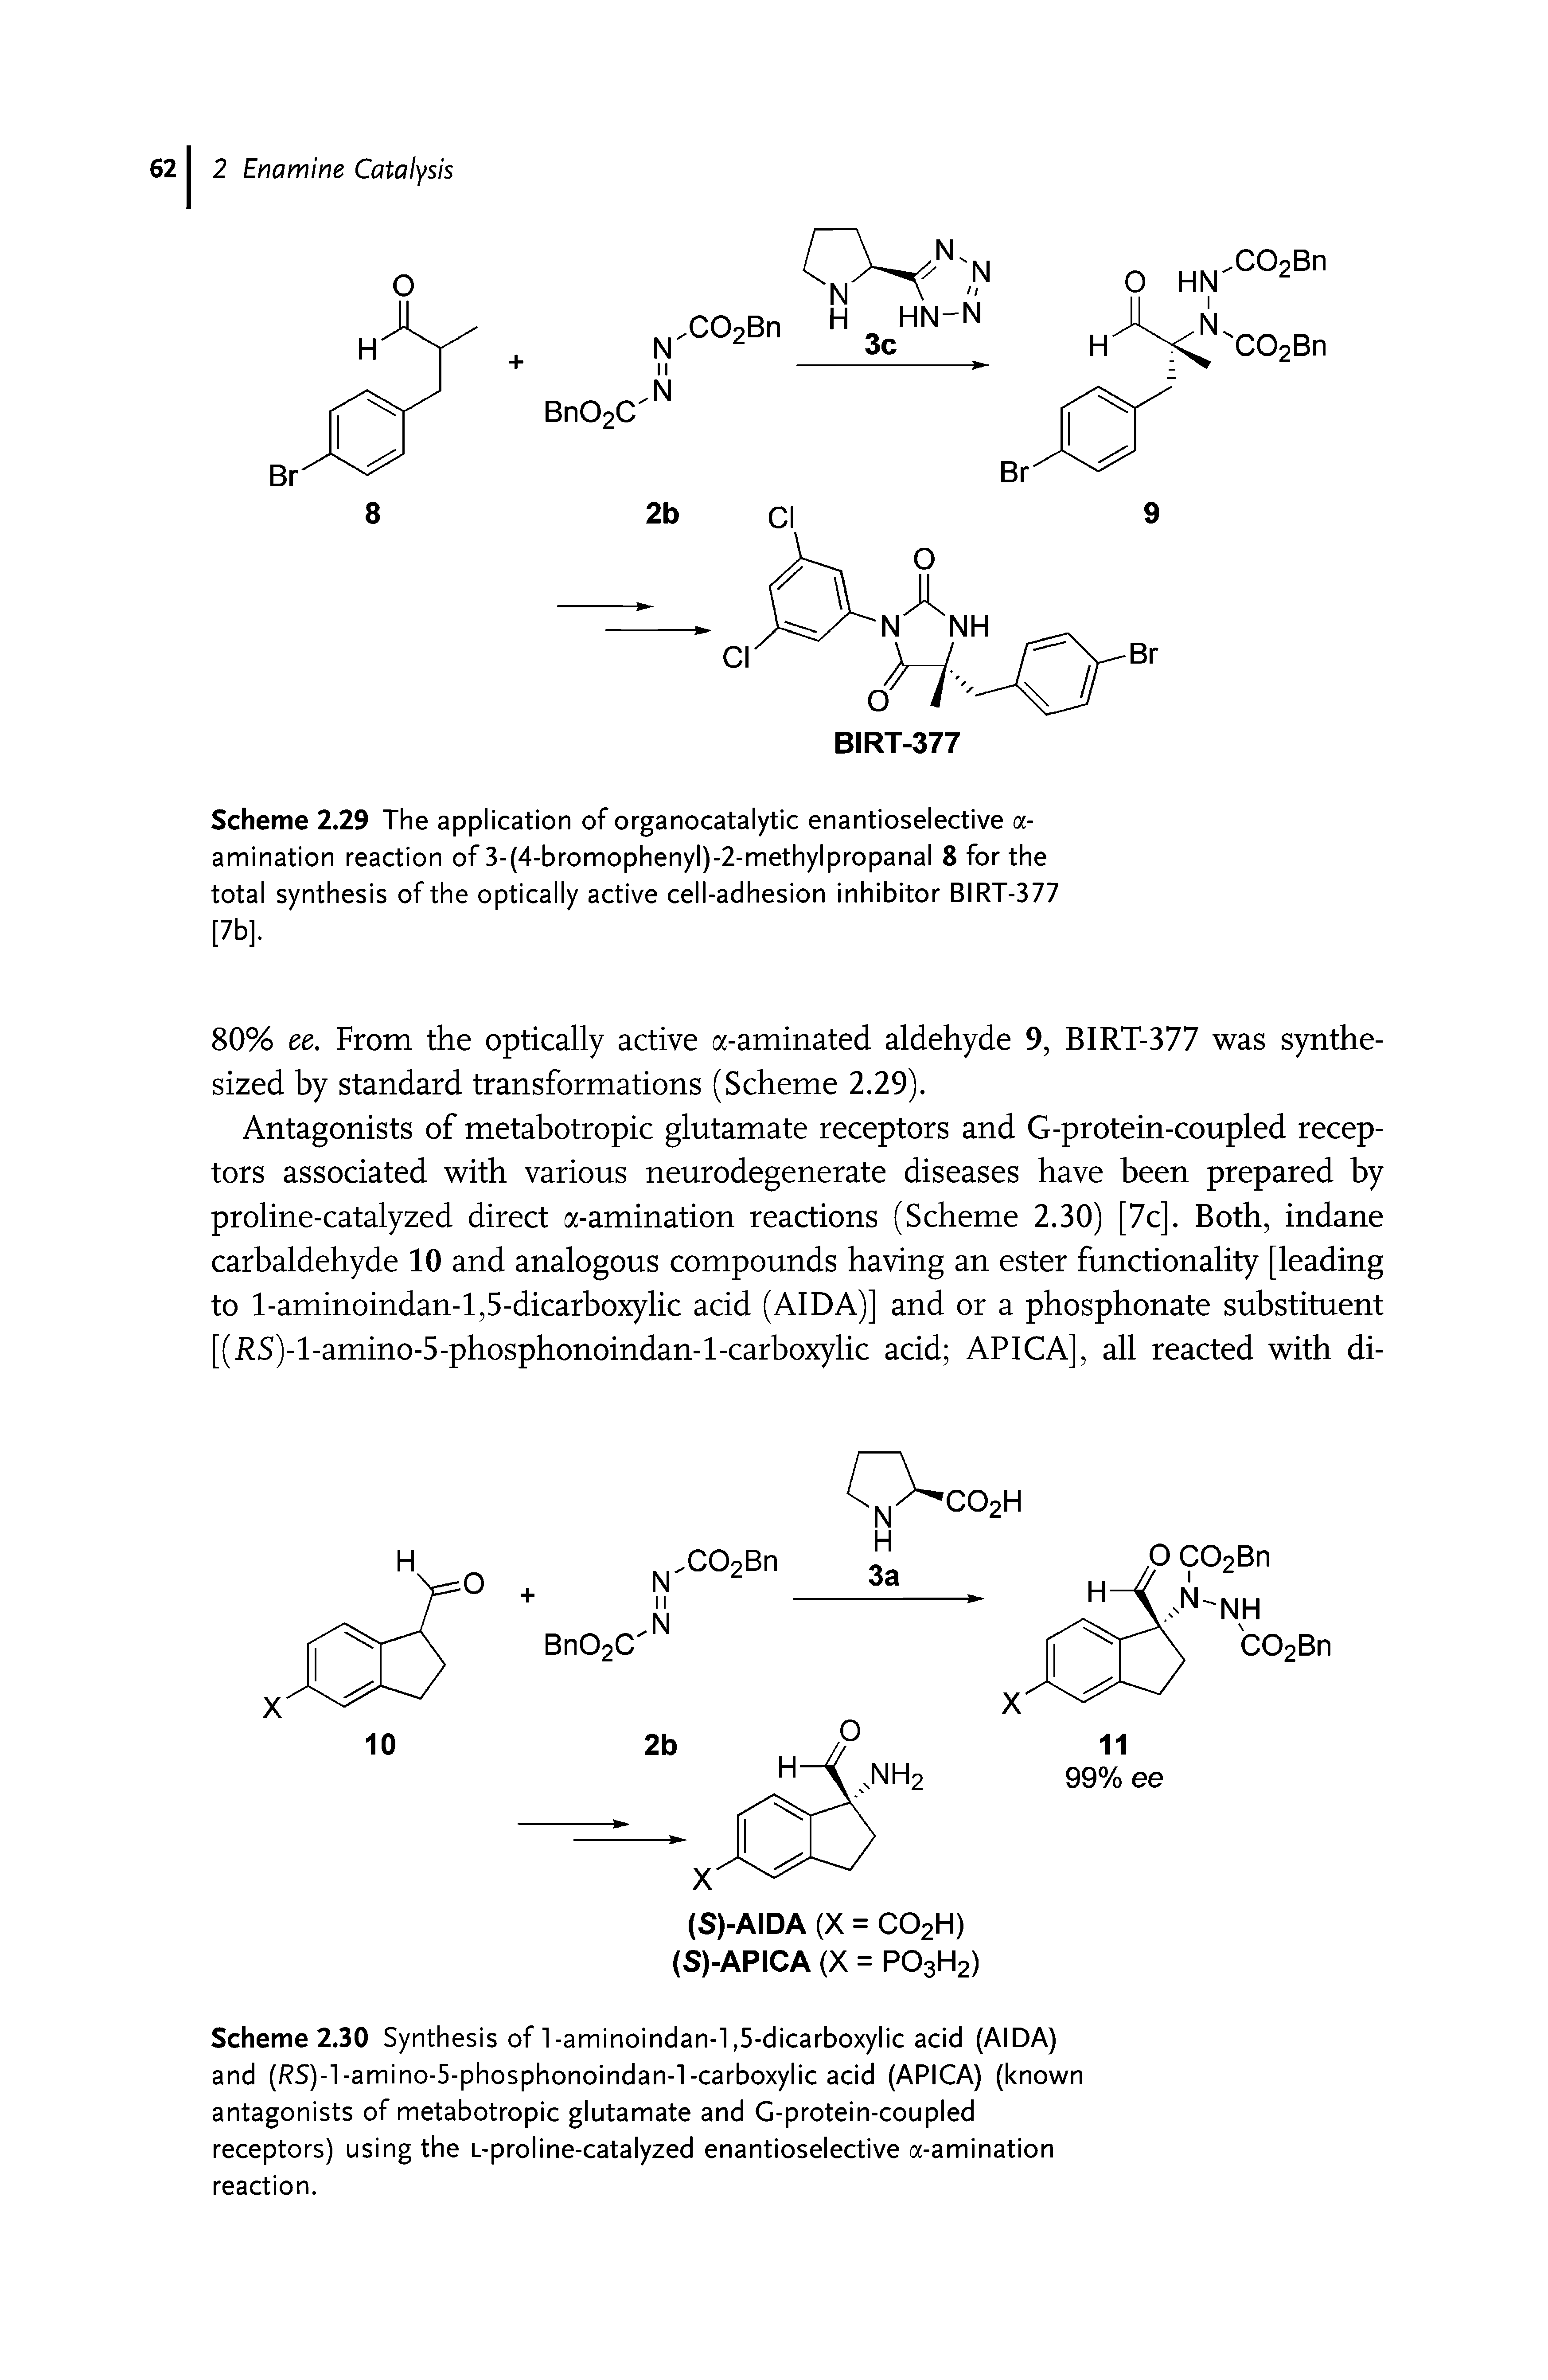 Scheme 2.29 The application of organocatalytic enantioselective a-amination reaction of 3-(4-bromophenyl)-2-methylpropanal 8 for the total synthesis of the optically active cell-adhesion inhibitor BIRT-377 [7b].